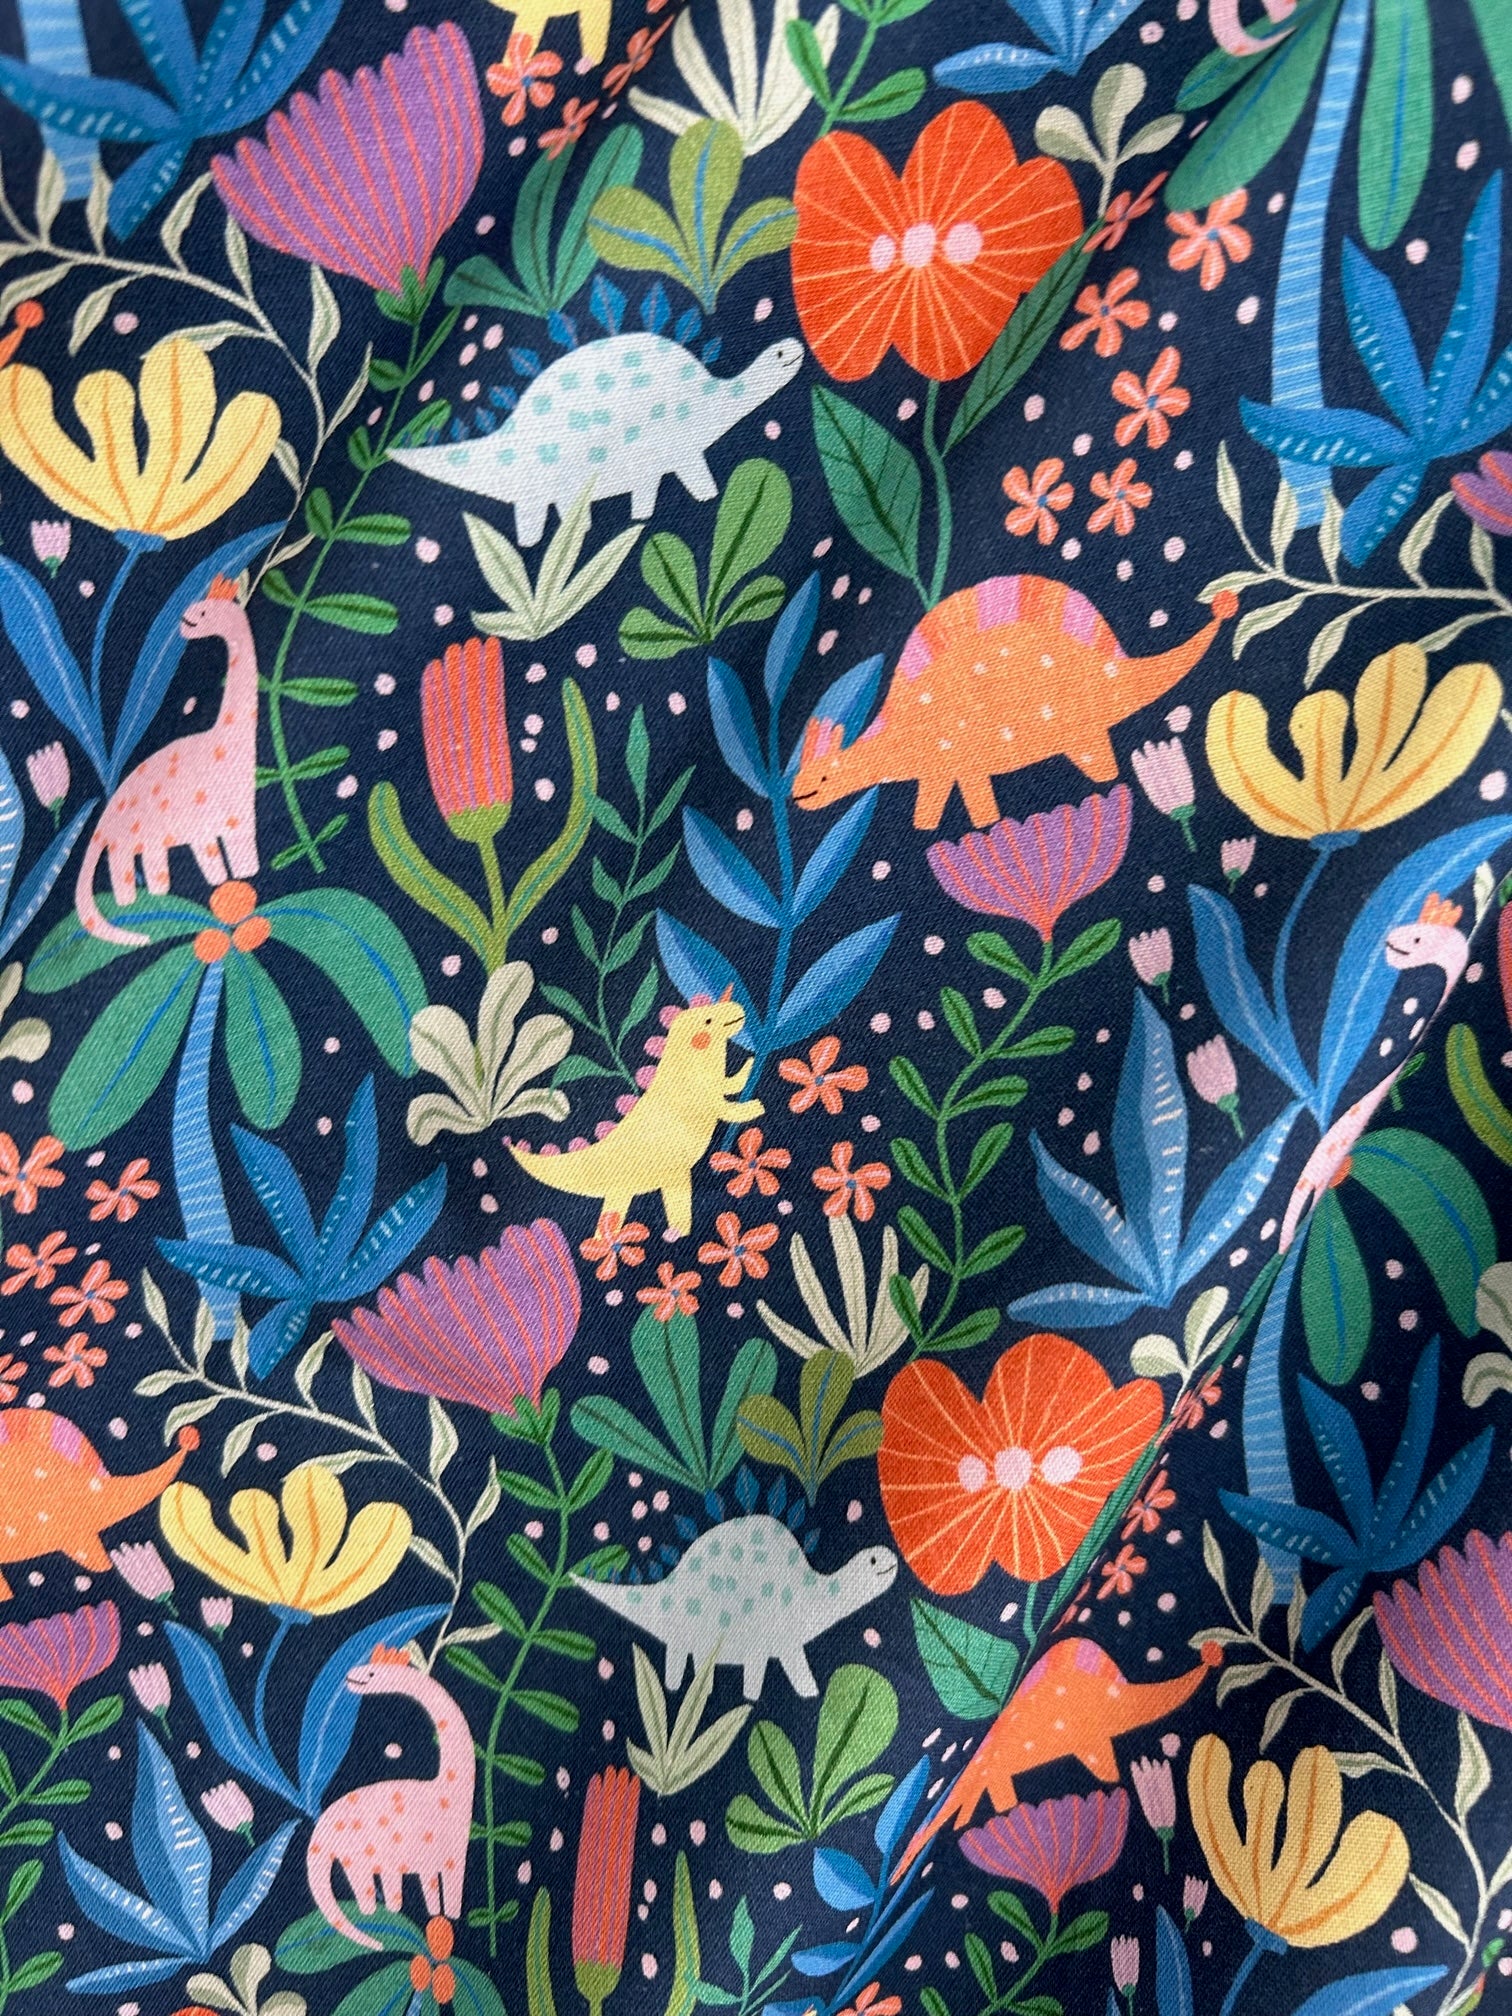 a close up of the fabric of the prehistoric vintage dress showing colorful dinosaurs on plants